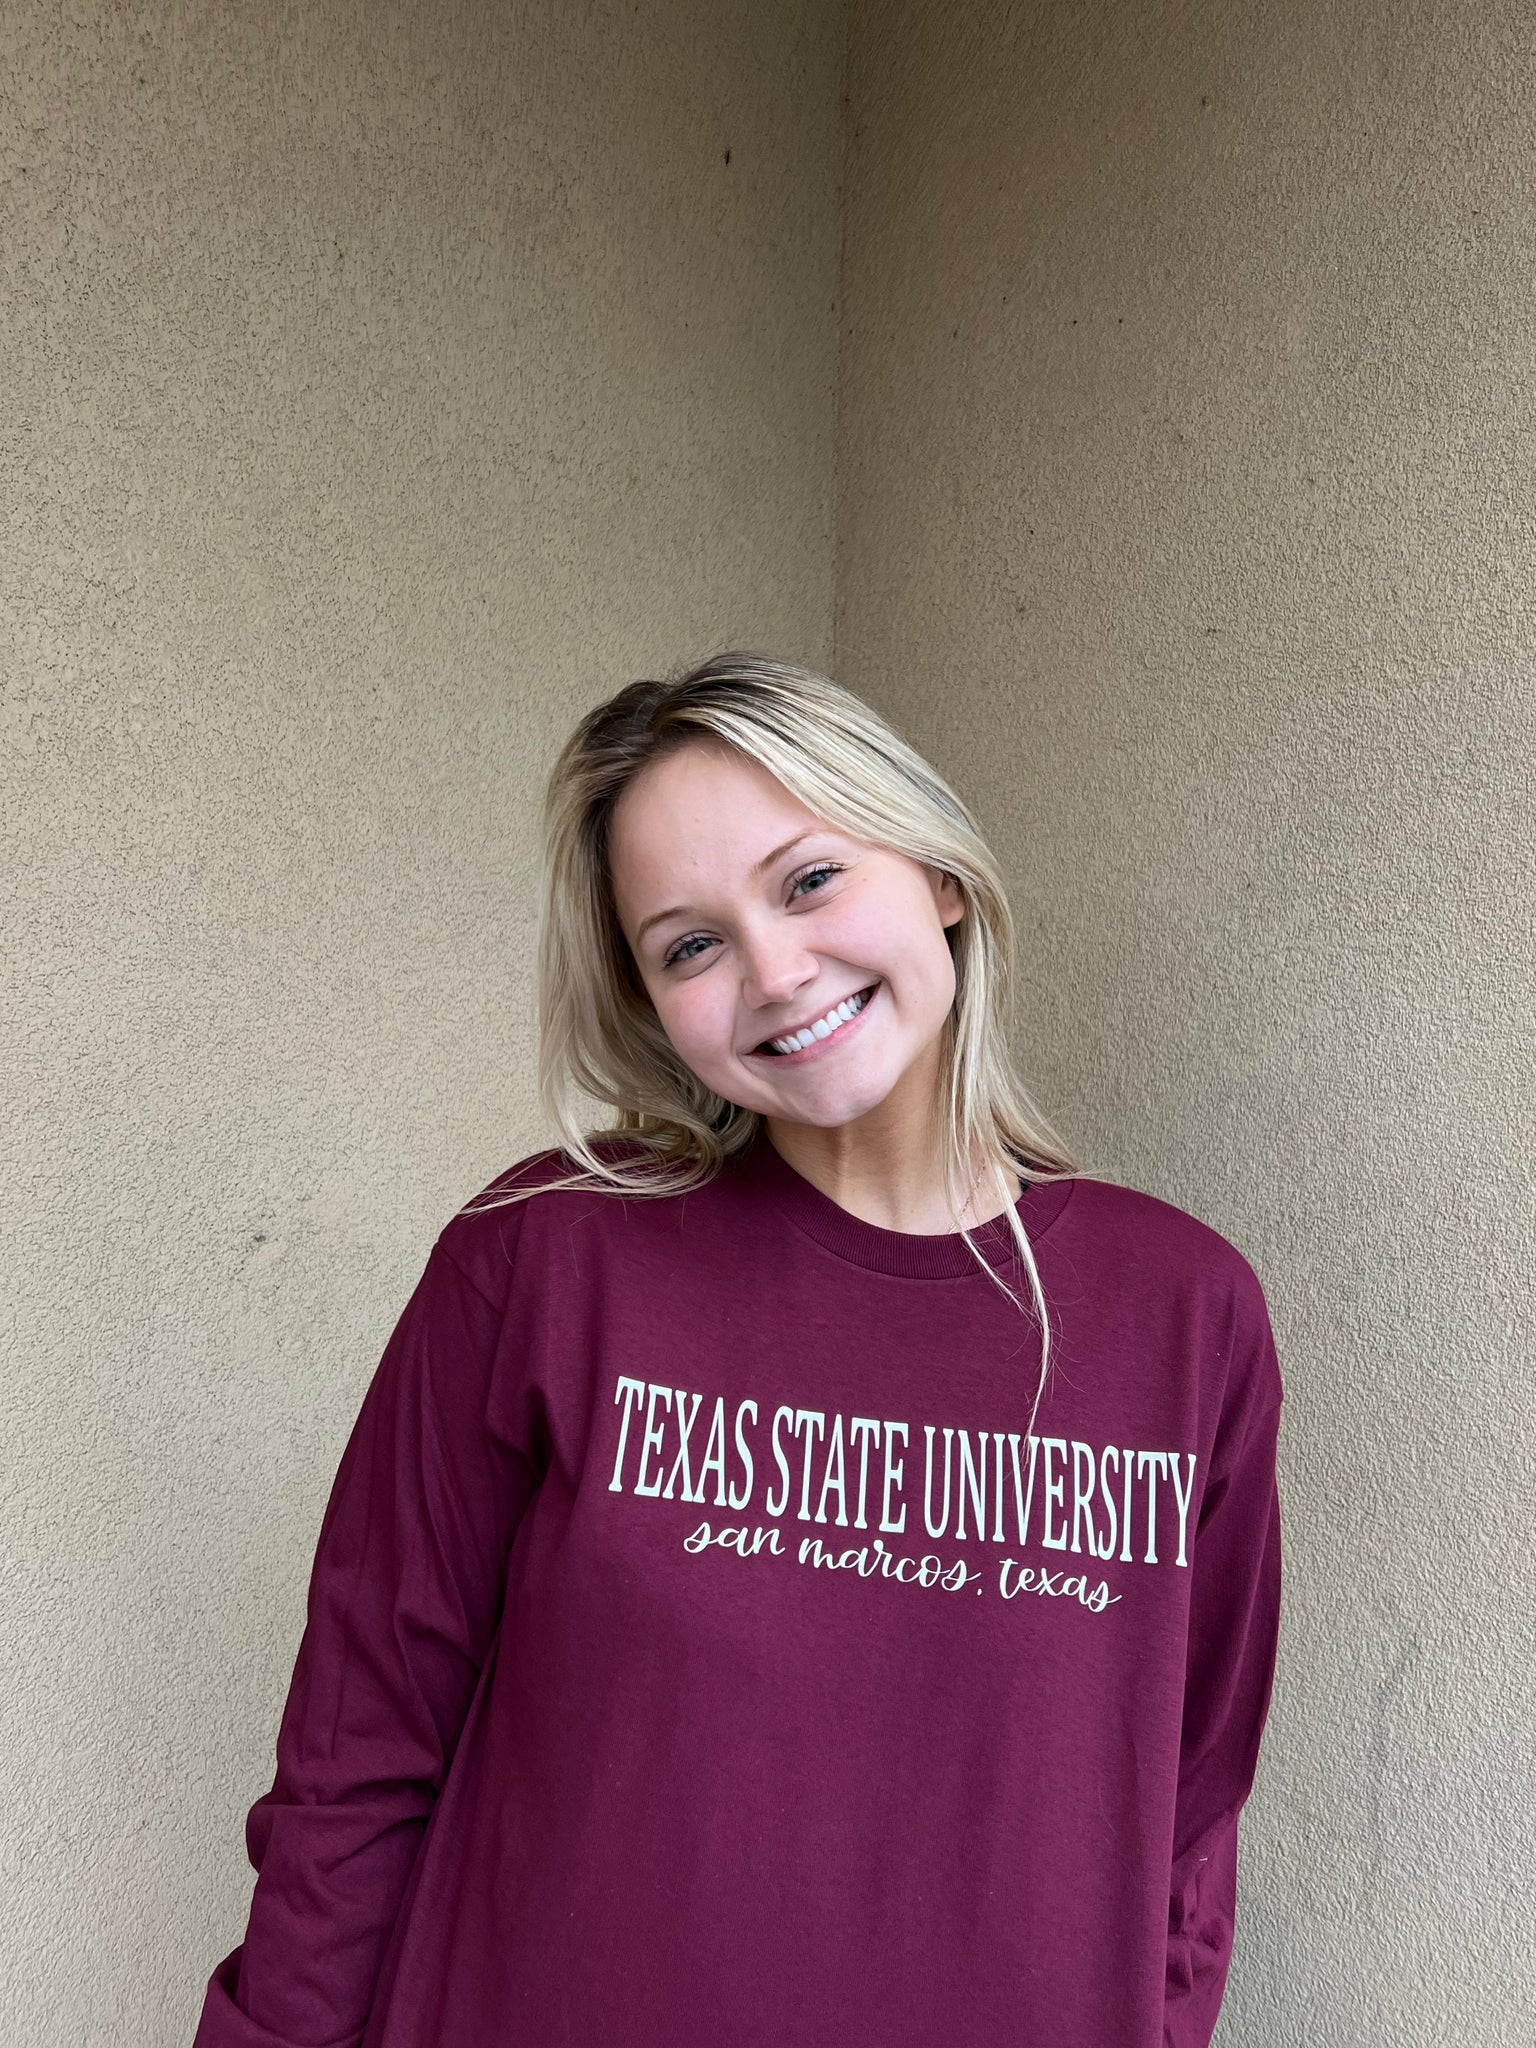 Texas State University Maroon Long Sleeved T-Shirt with Cream Vinyl Lettering